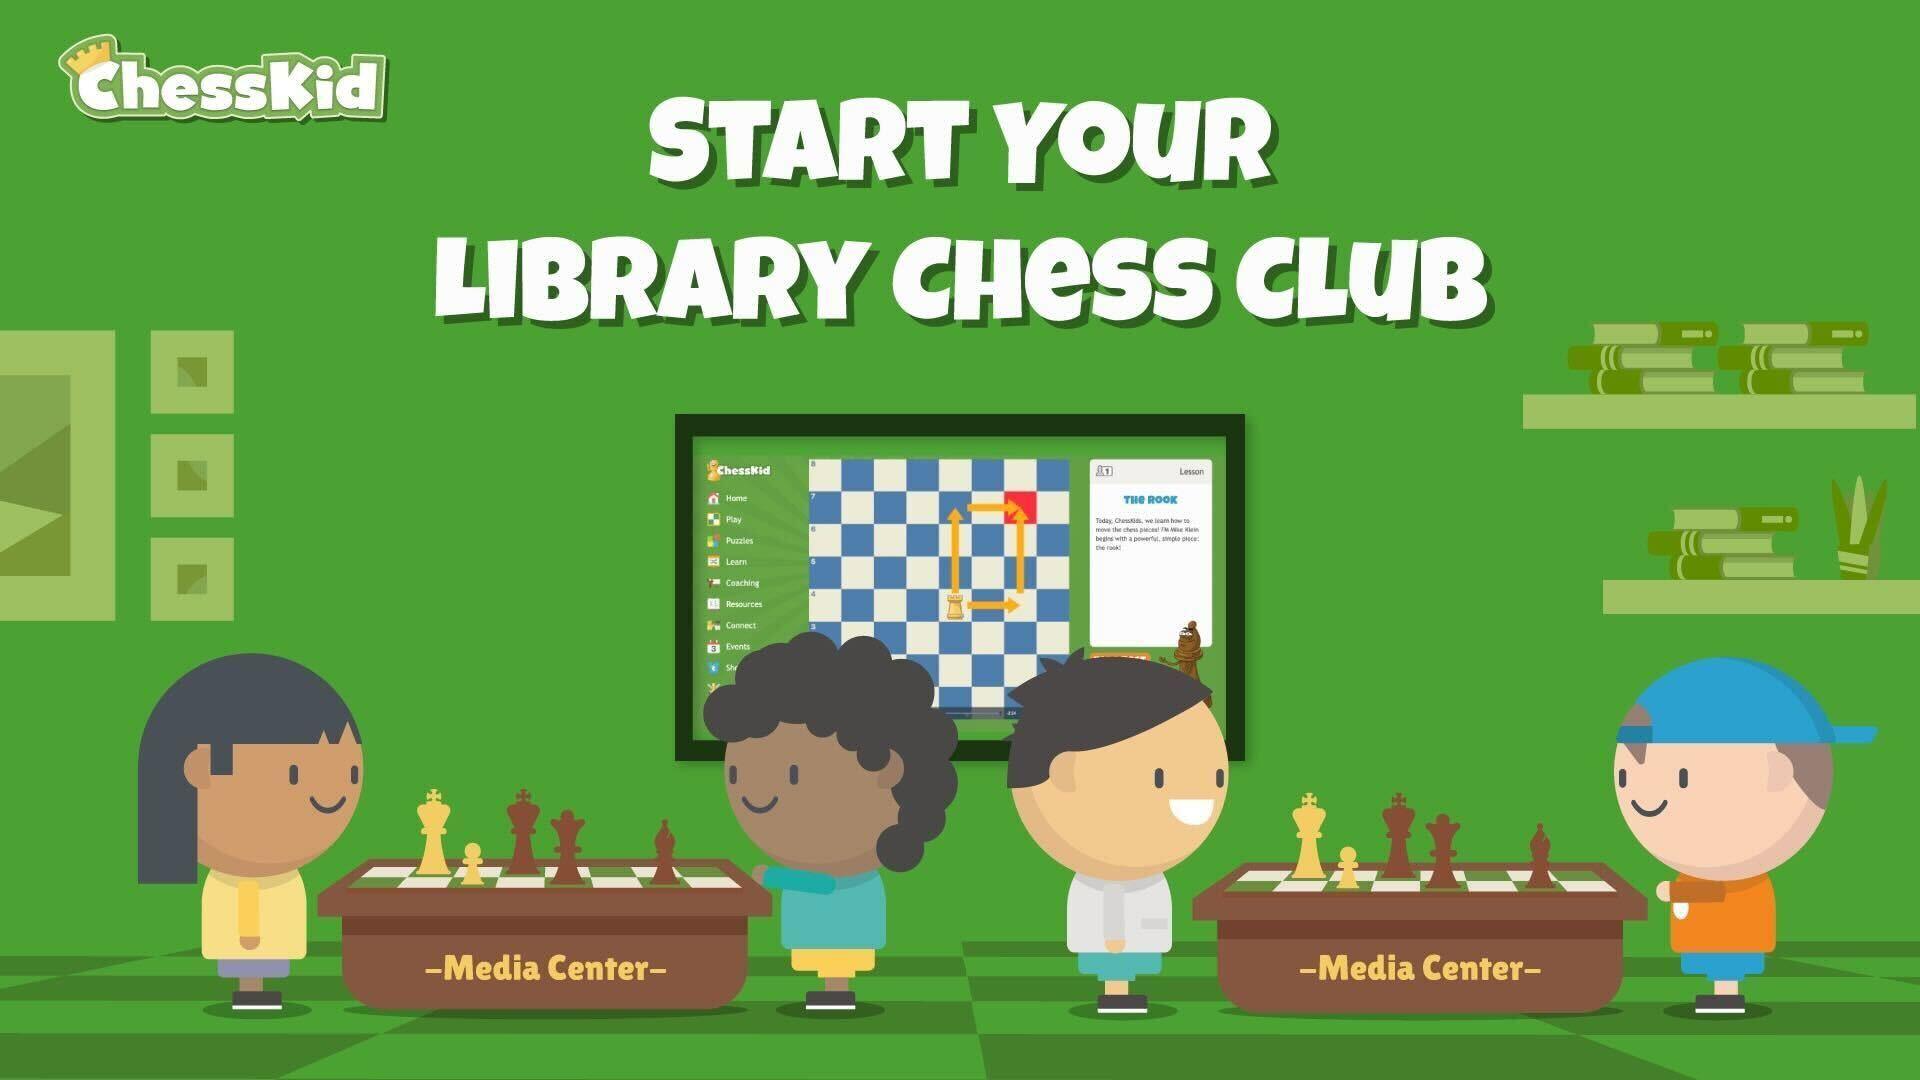 ChessKid Announces Library Chess Club Initiative